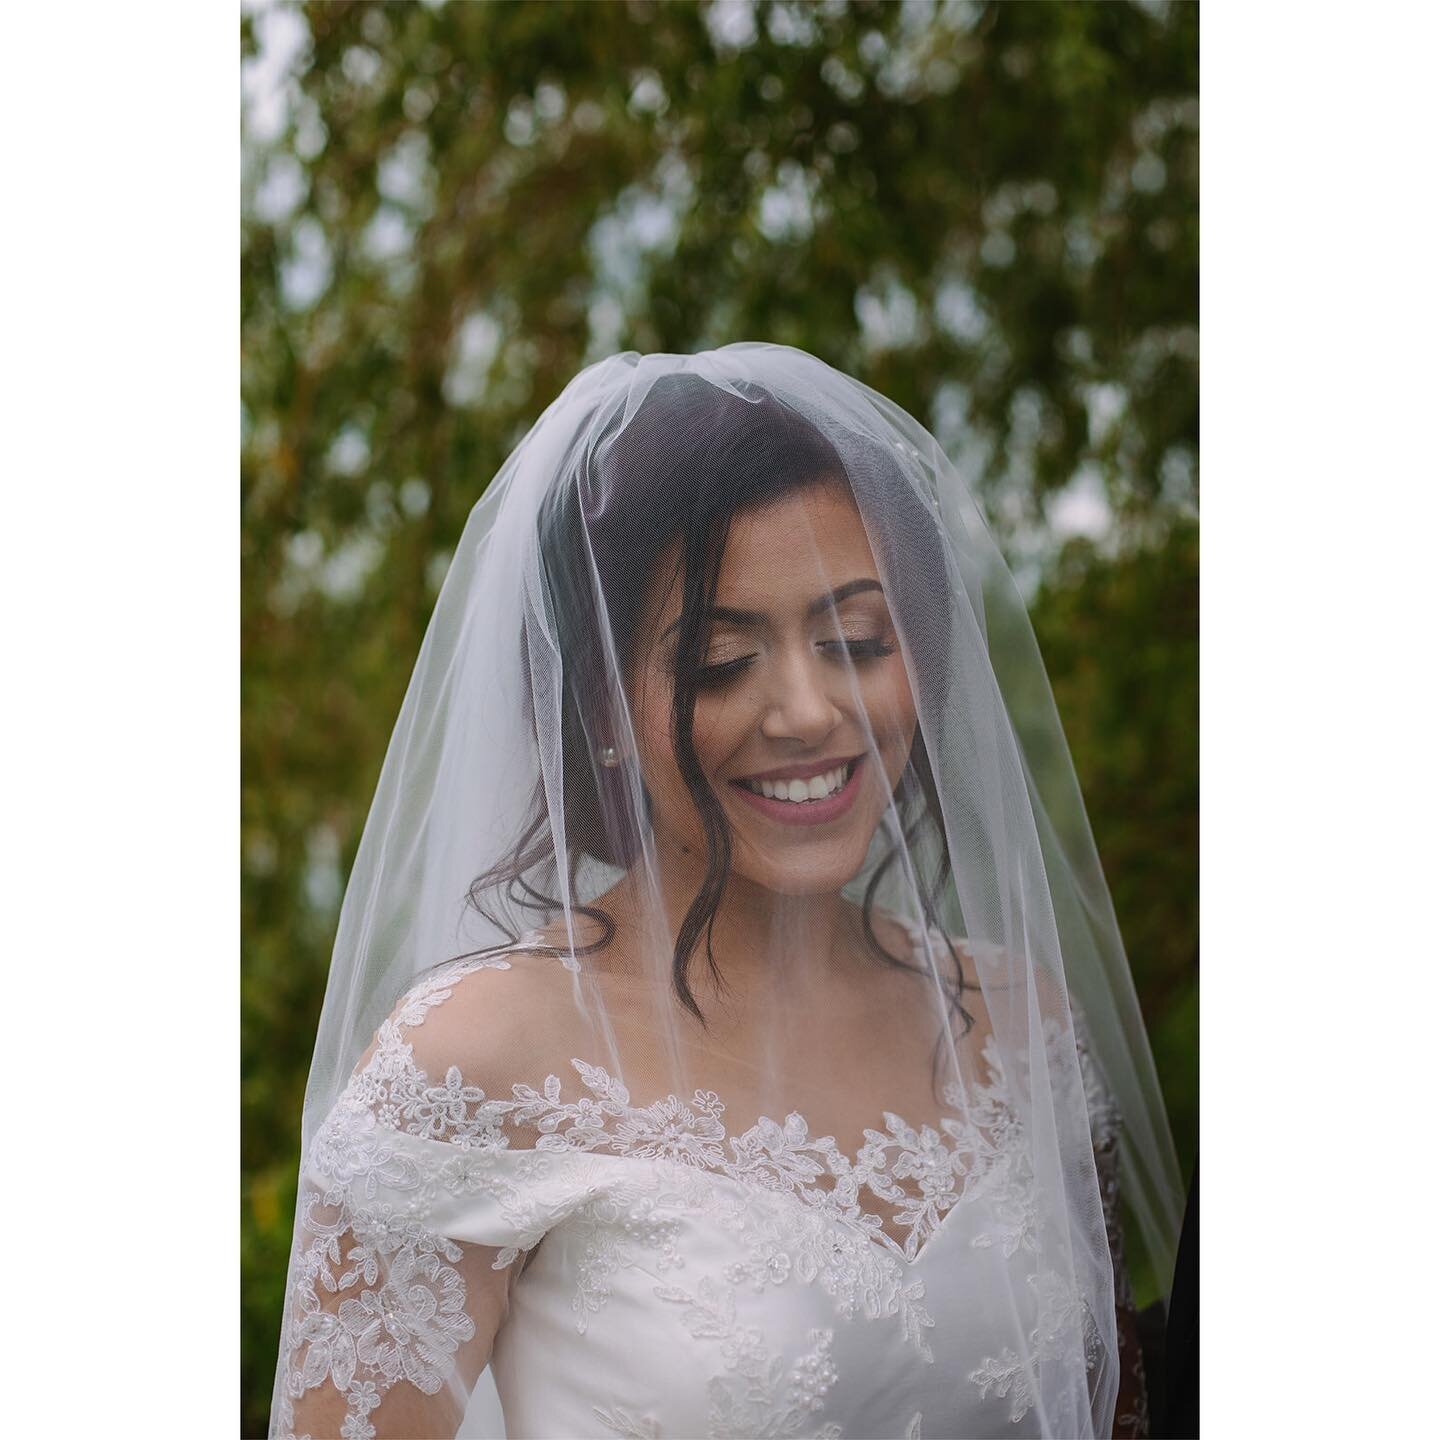 When I met Amira a few weeks before the wedding, we talked about all the details and timeline of the day. On the way home, she texted me asking for my opinion about her veil, and I advised her to get the one that can go over her face because then we 